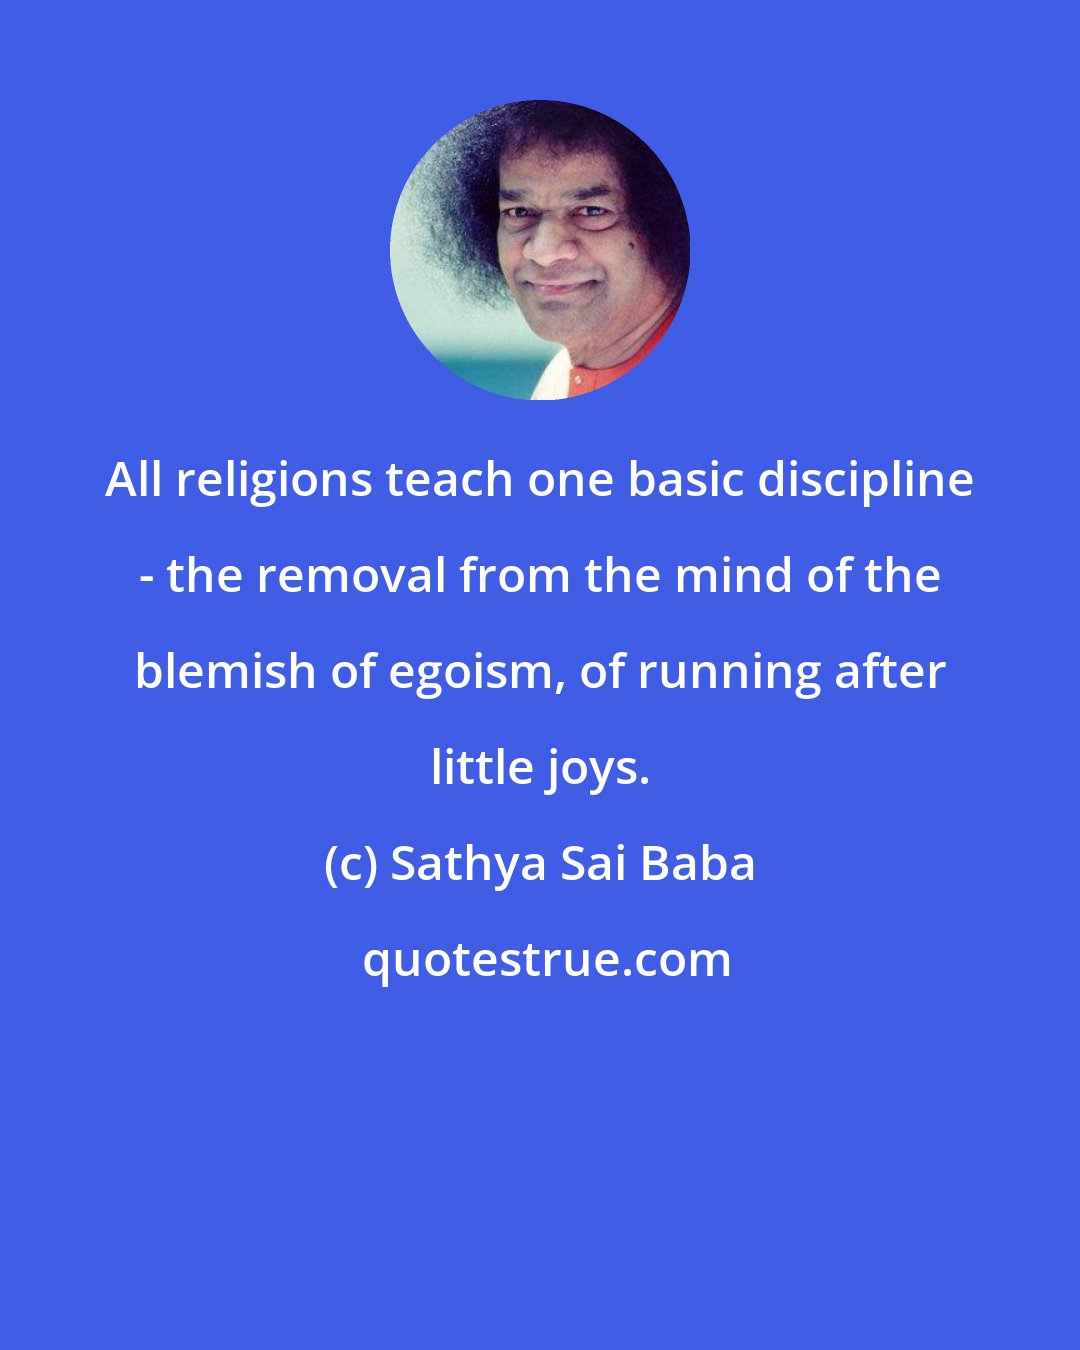 Sathya Sai Baba: All religions teach one basic discipline - the removal from the mind of the blemish of egoism, of running after little joys.